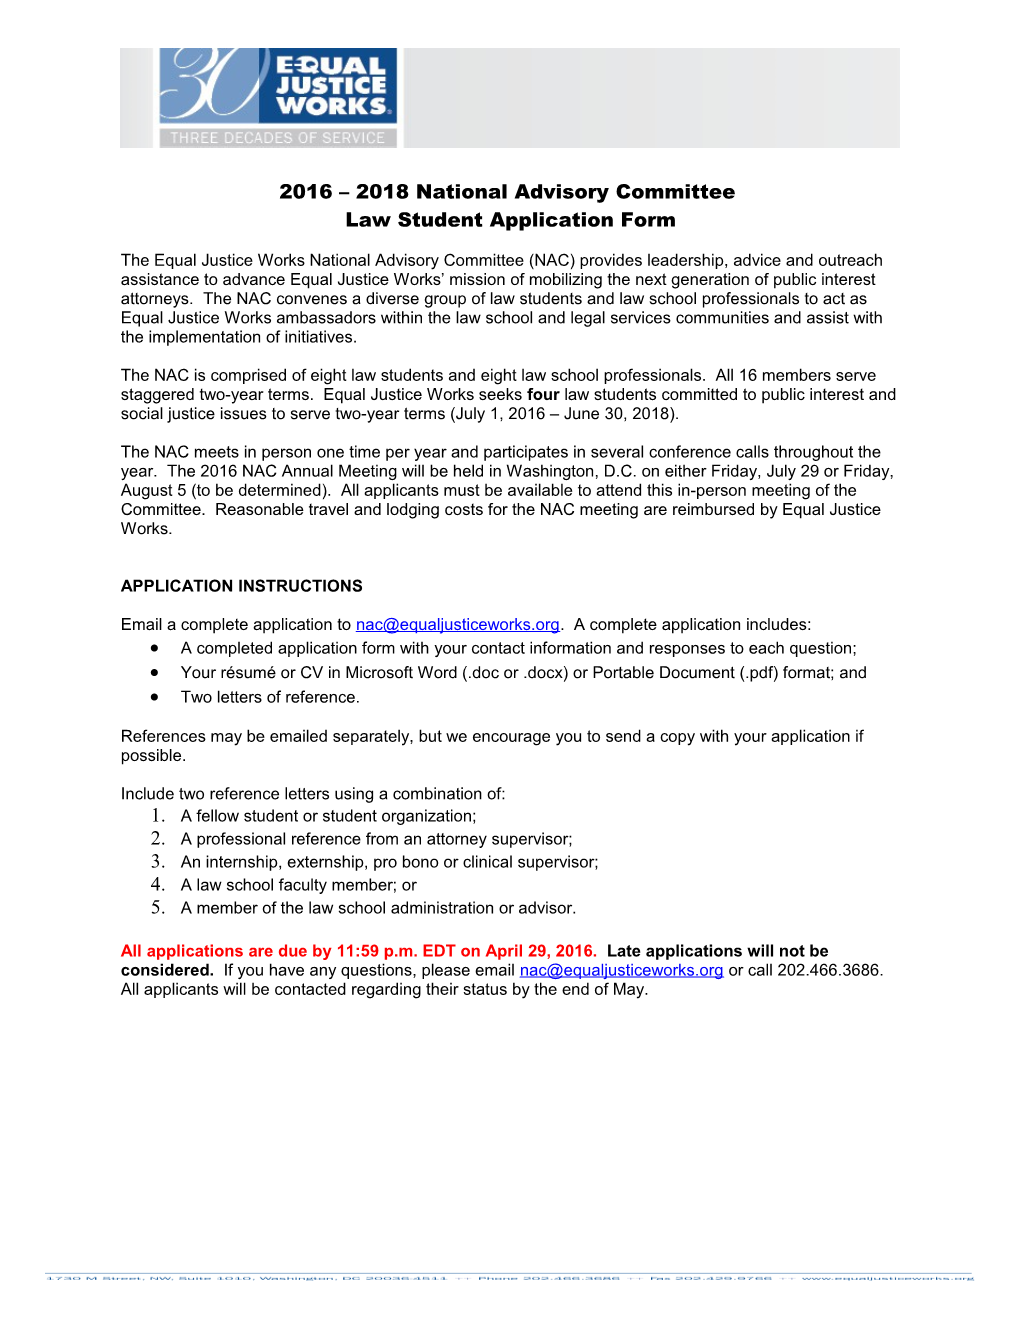 2014 Equal Justice Works National Advisory Committee Applicationpage 1 of 4